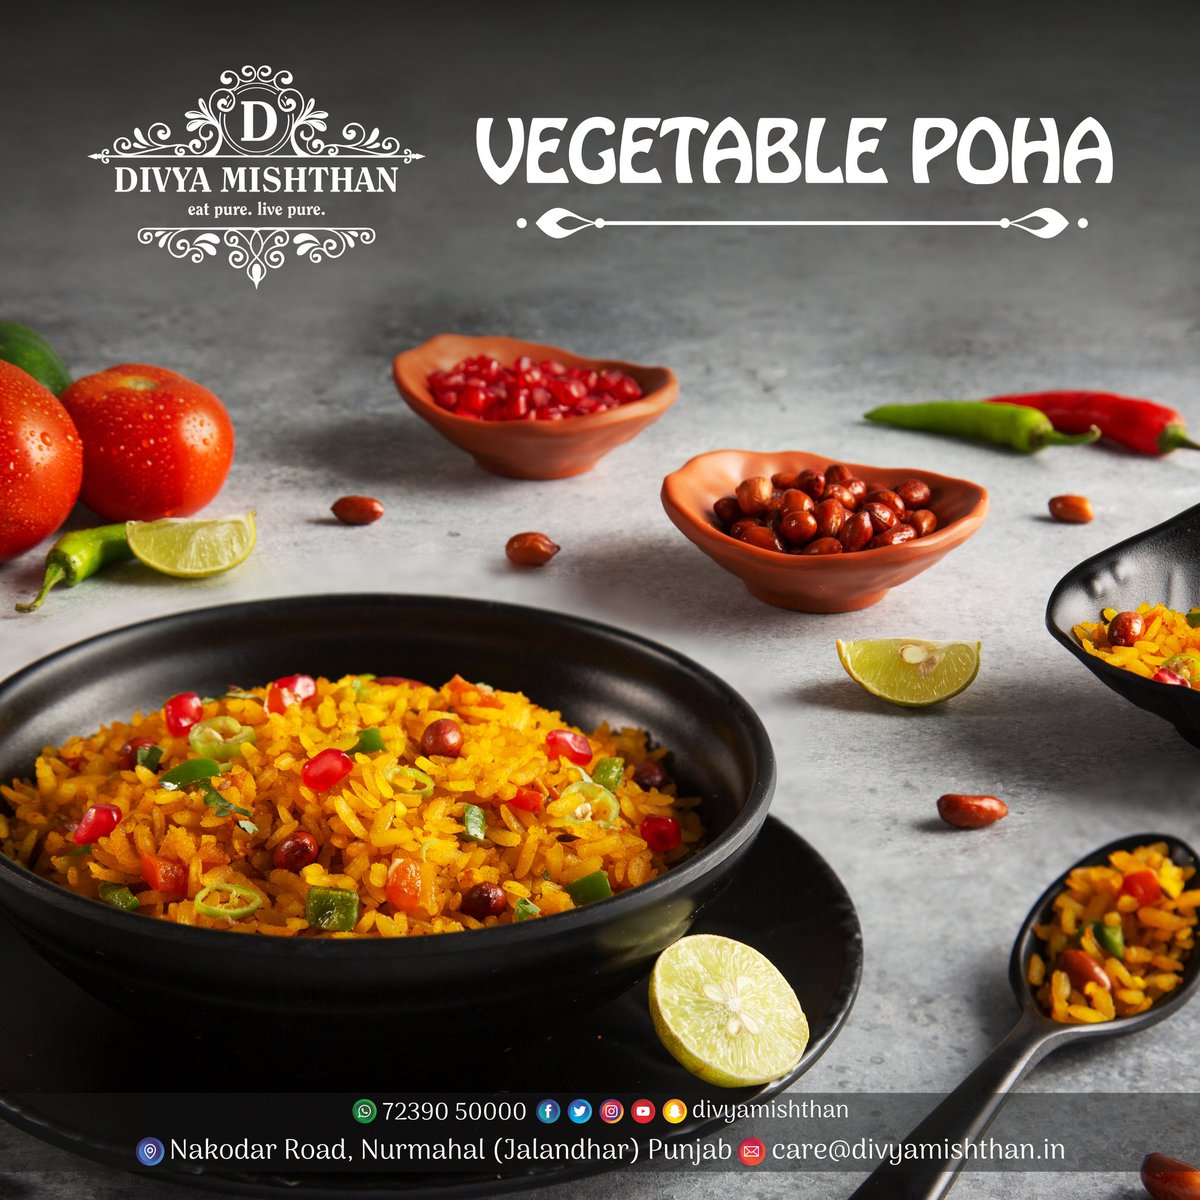 The most delicious poha, a popular Indian Snack, is made with flattened rice, spices, peanuts, curry leavs and lemon wedges.

For Order call/whatsapp:
72390-50000

#vegetablepoha #poha #freshvegetables #veggies #vegetables #rice #spices #peanuts #curryleaves #lemon #divyamishthan